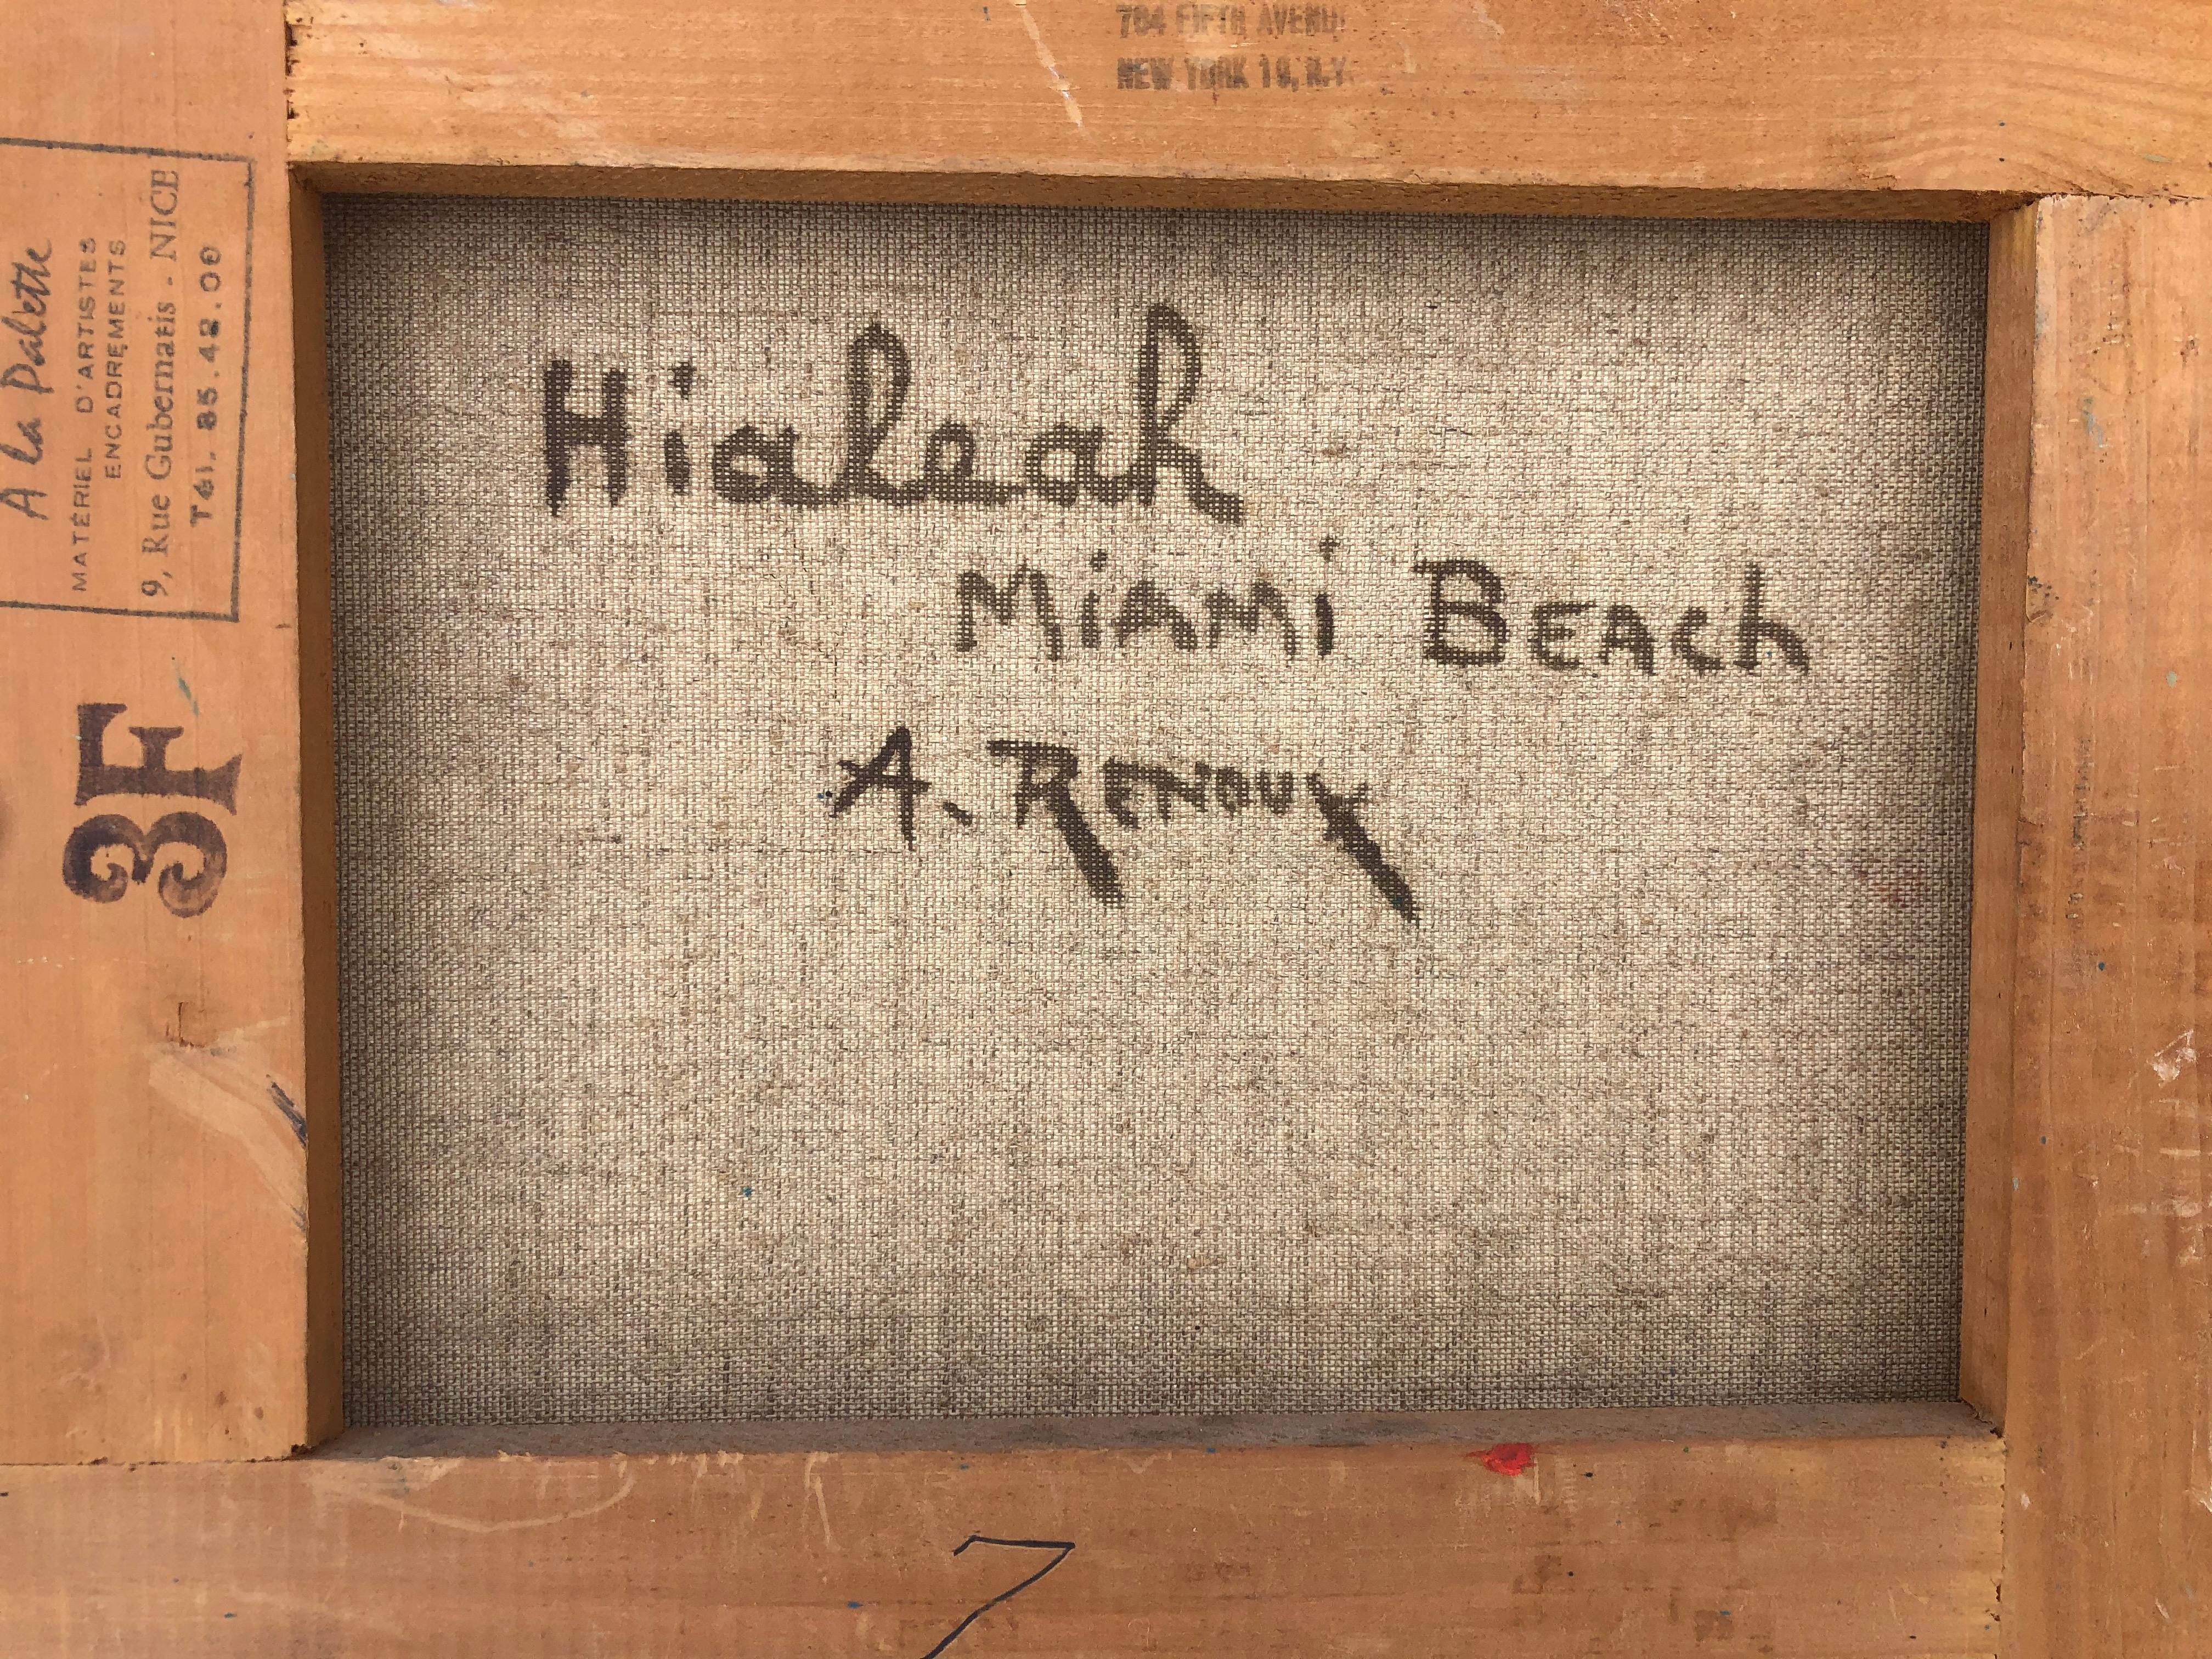 Andre Renoux: 1939-2002. Listed French artist with auction results over $5000, but sells for much more in galleries. This is a truly wonderful mid century and unique slice of Florida history. The Hialeah Race Track was first opened in 1922. All of